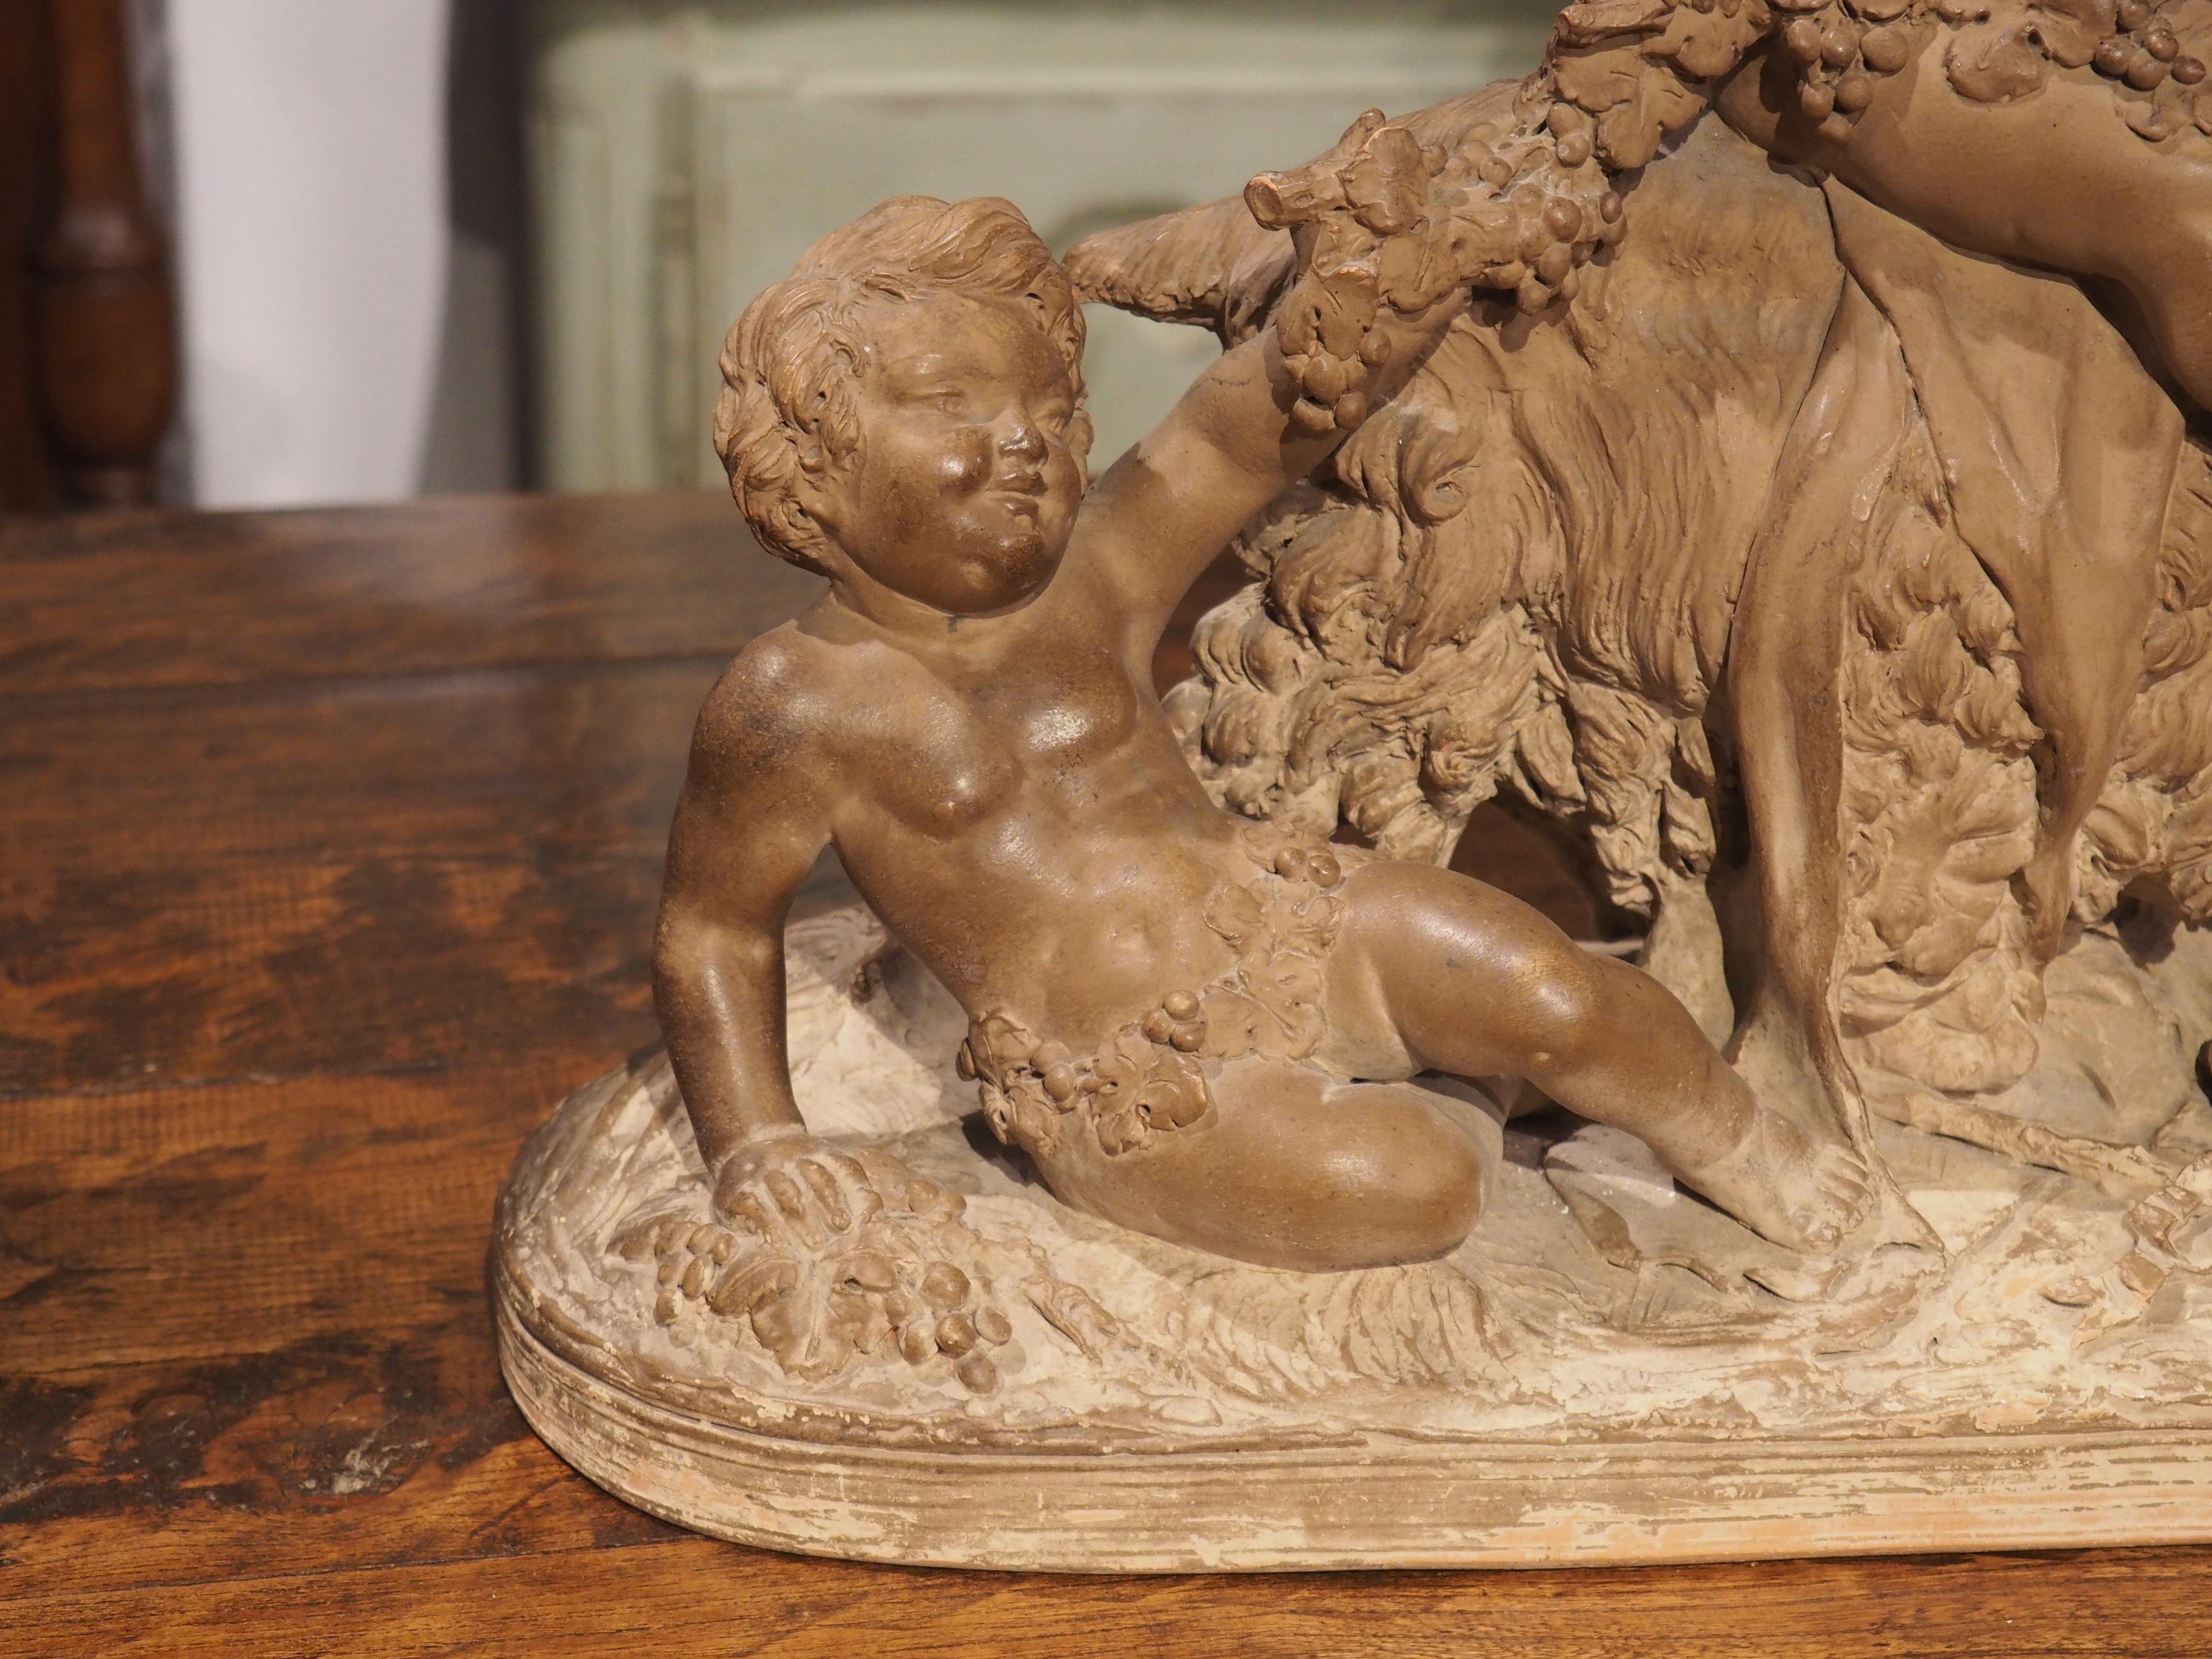 A lovely depiction of the neoclassical taste, three putti can be seen playing with a goat. The terra cotta sculpture from the 1800s has a variegated patination, with hues of dark ochre, gray, and cream.

Each putto is bedecked with a ring of